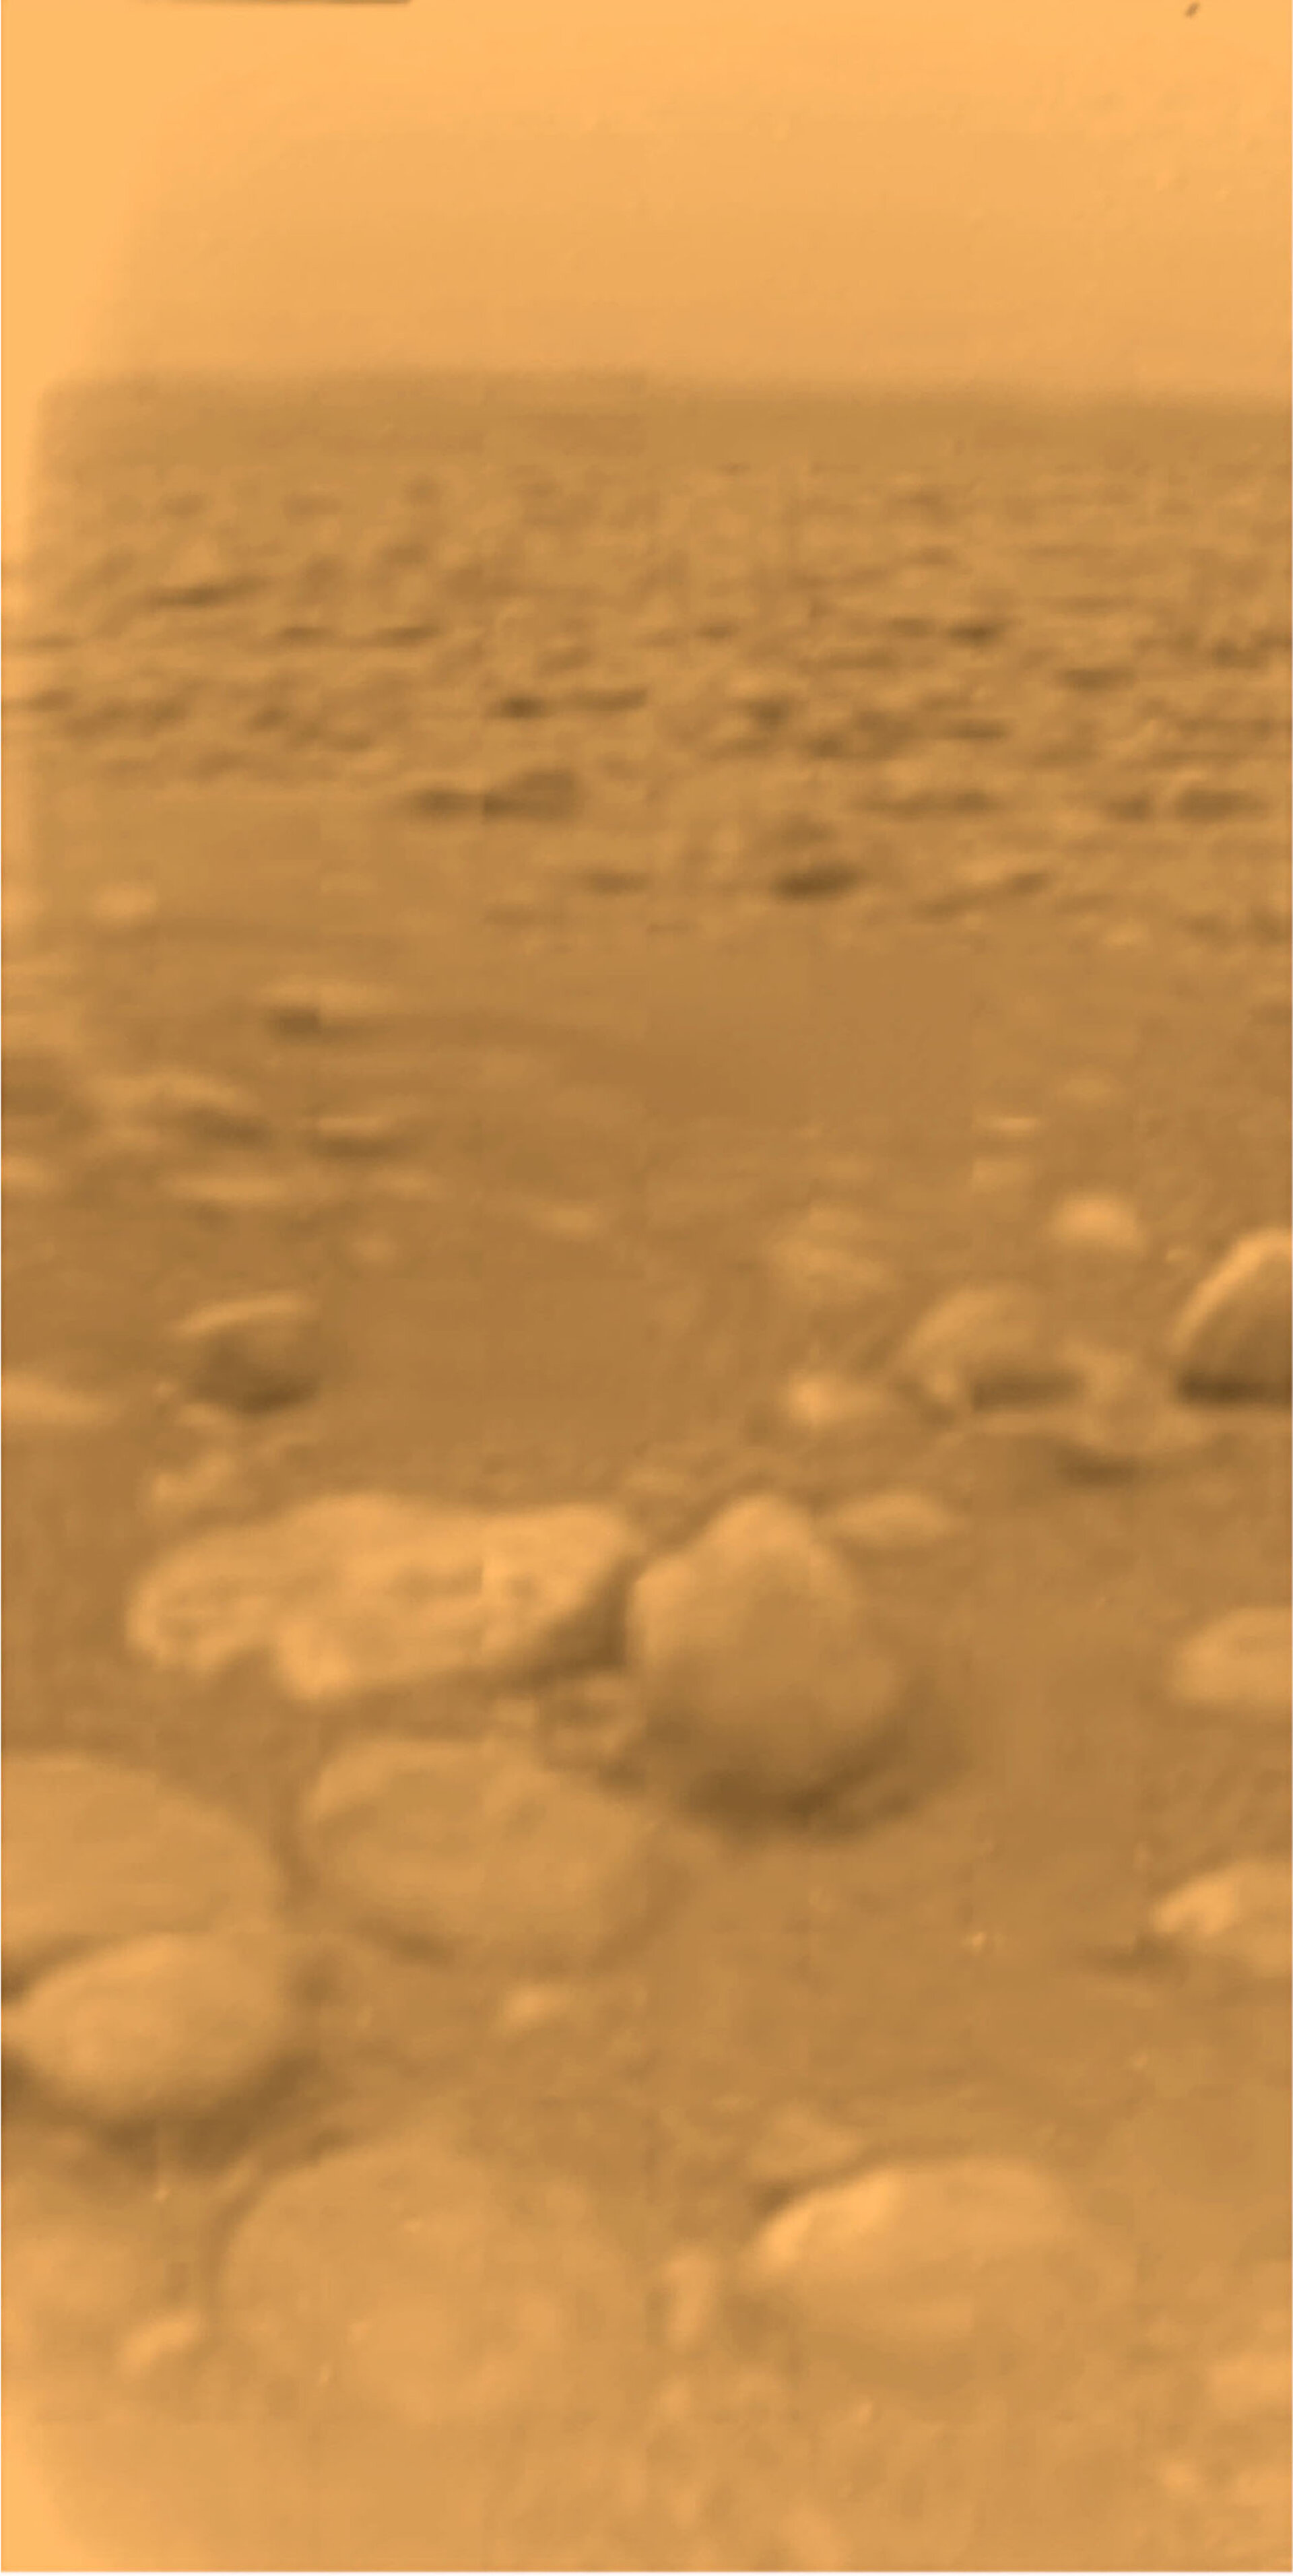 First image of Titan's surface